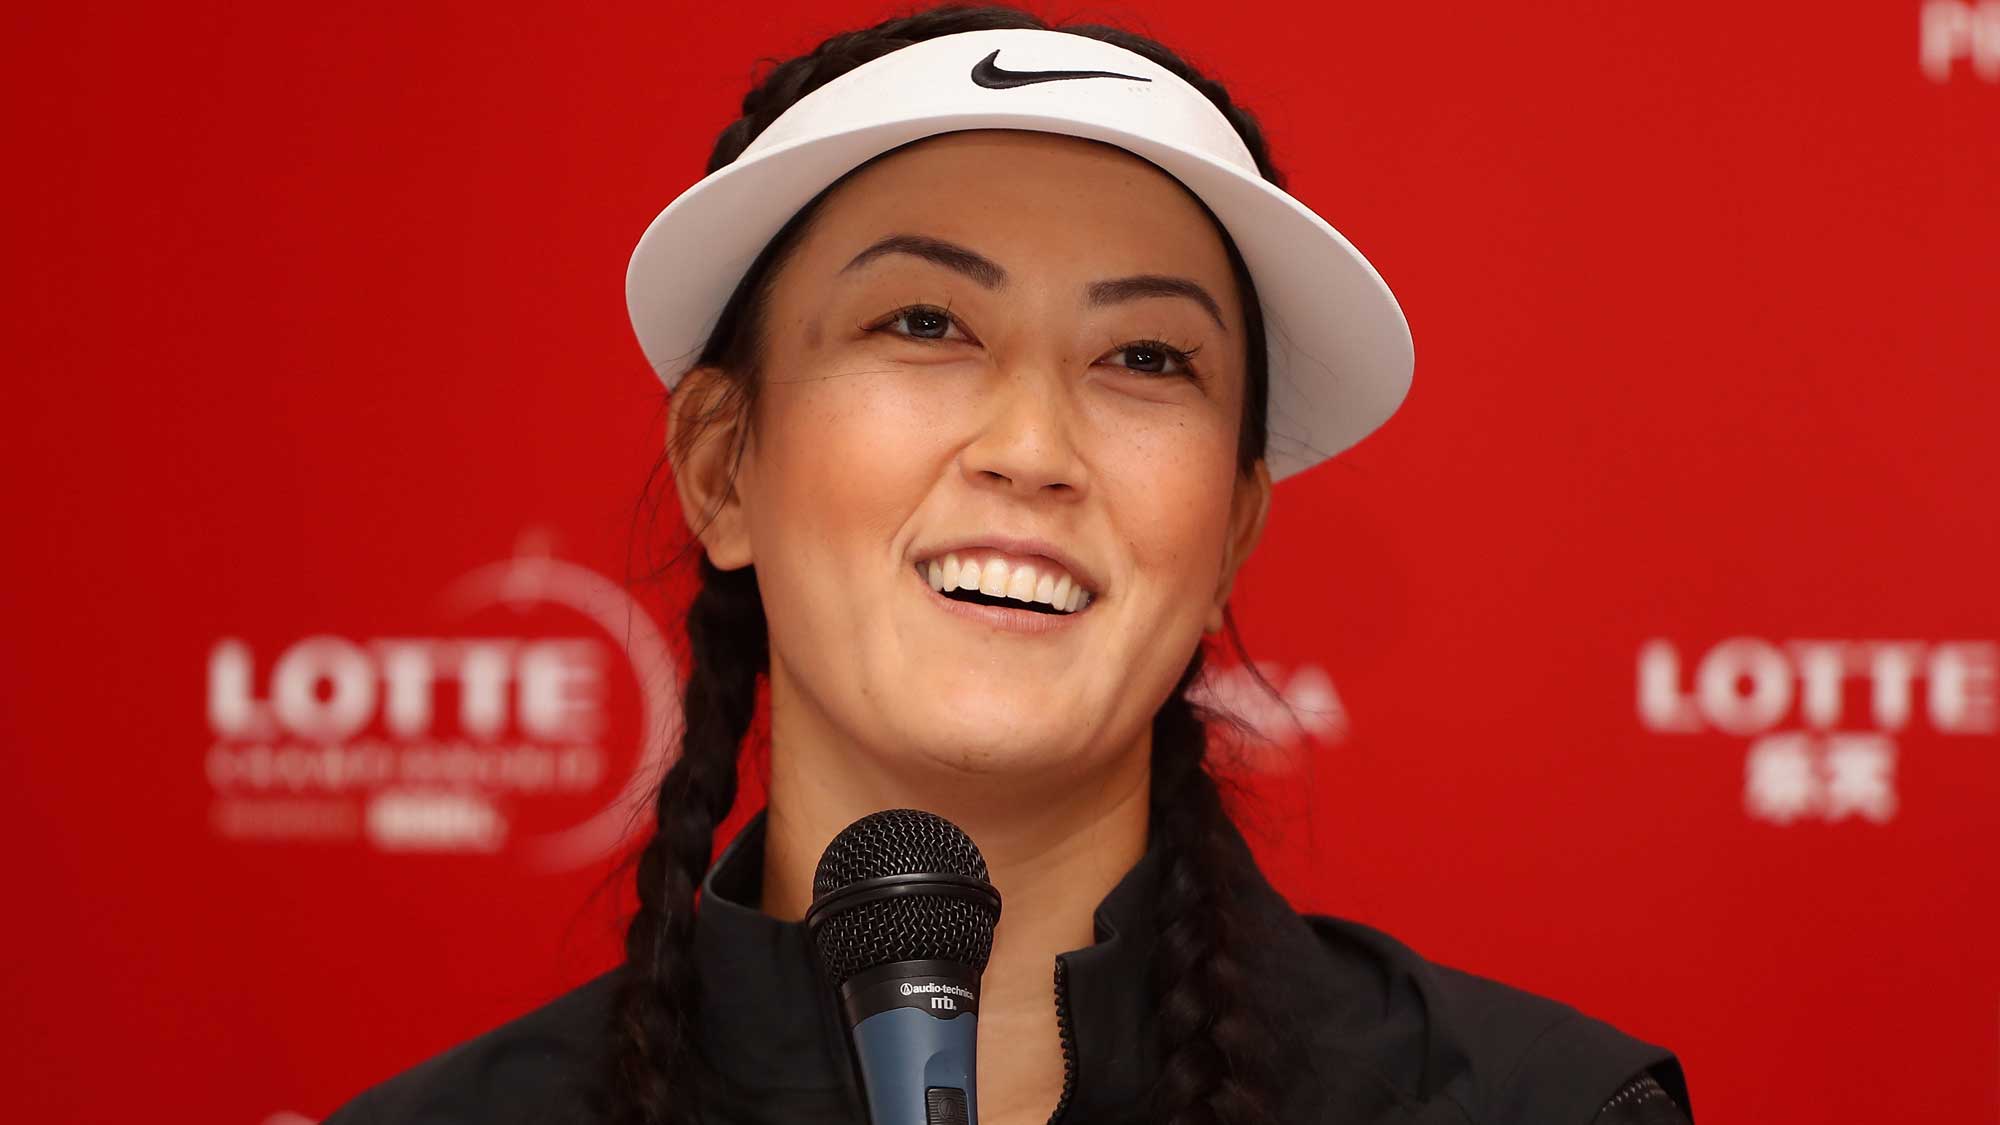 Michelle Wie speaks at a press conference ahead of the LPGA LOTTE Championship Presented By Hershey at Ko Olina Golf Club